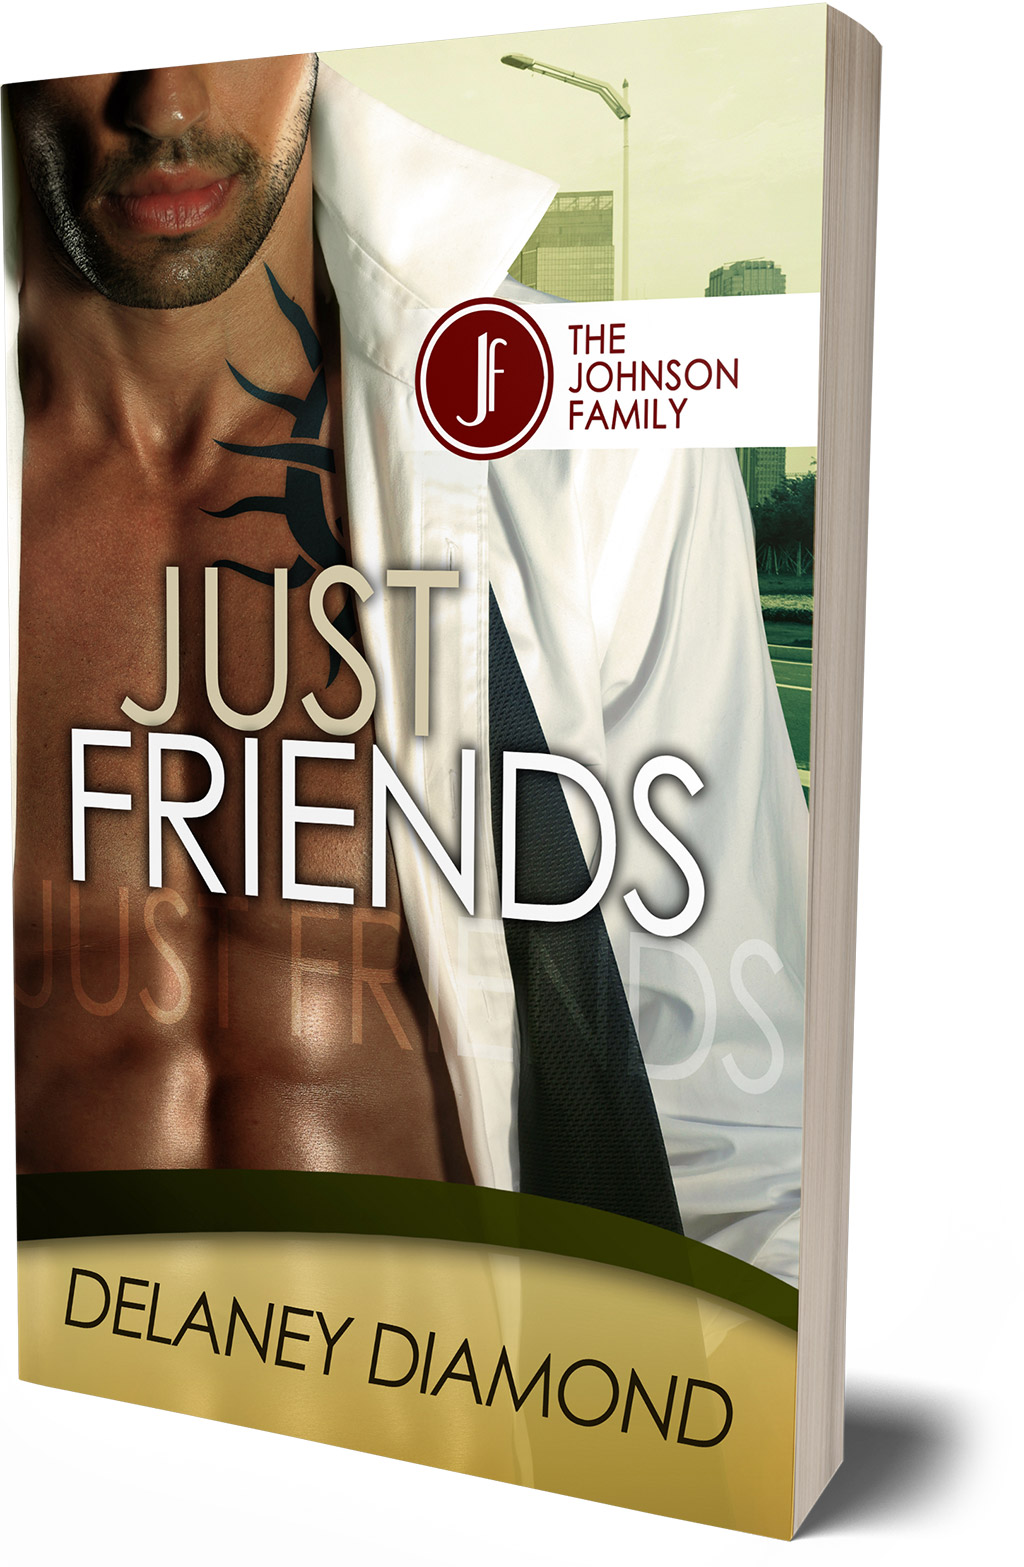 Just Friends, The Johnson Family Book 3, by Delaney Diamond